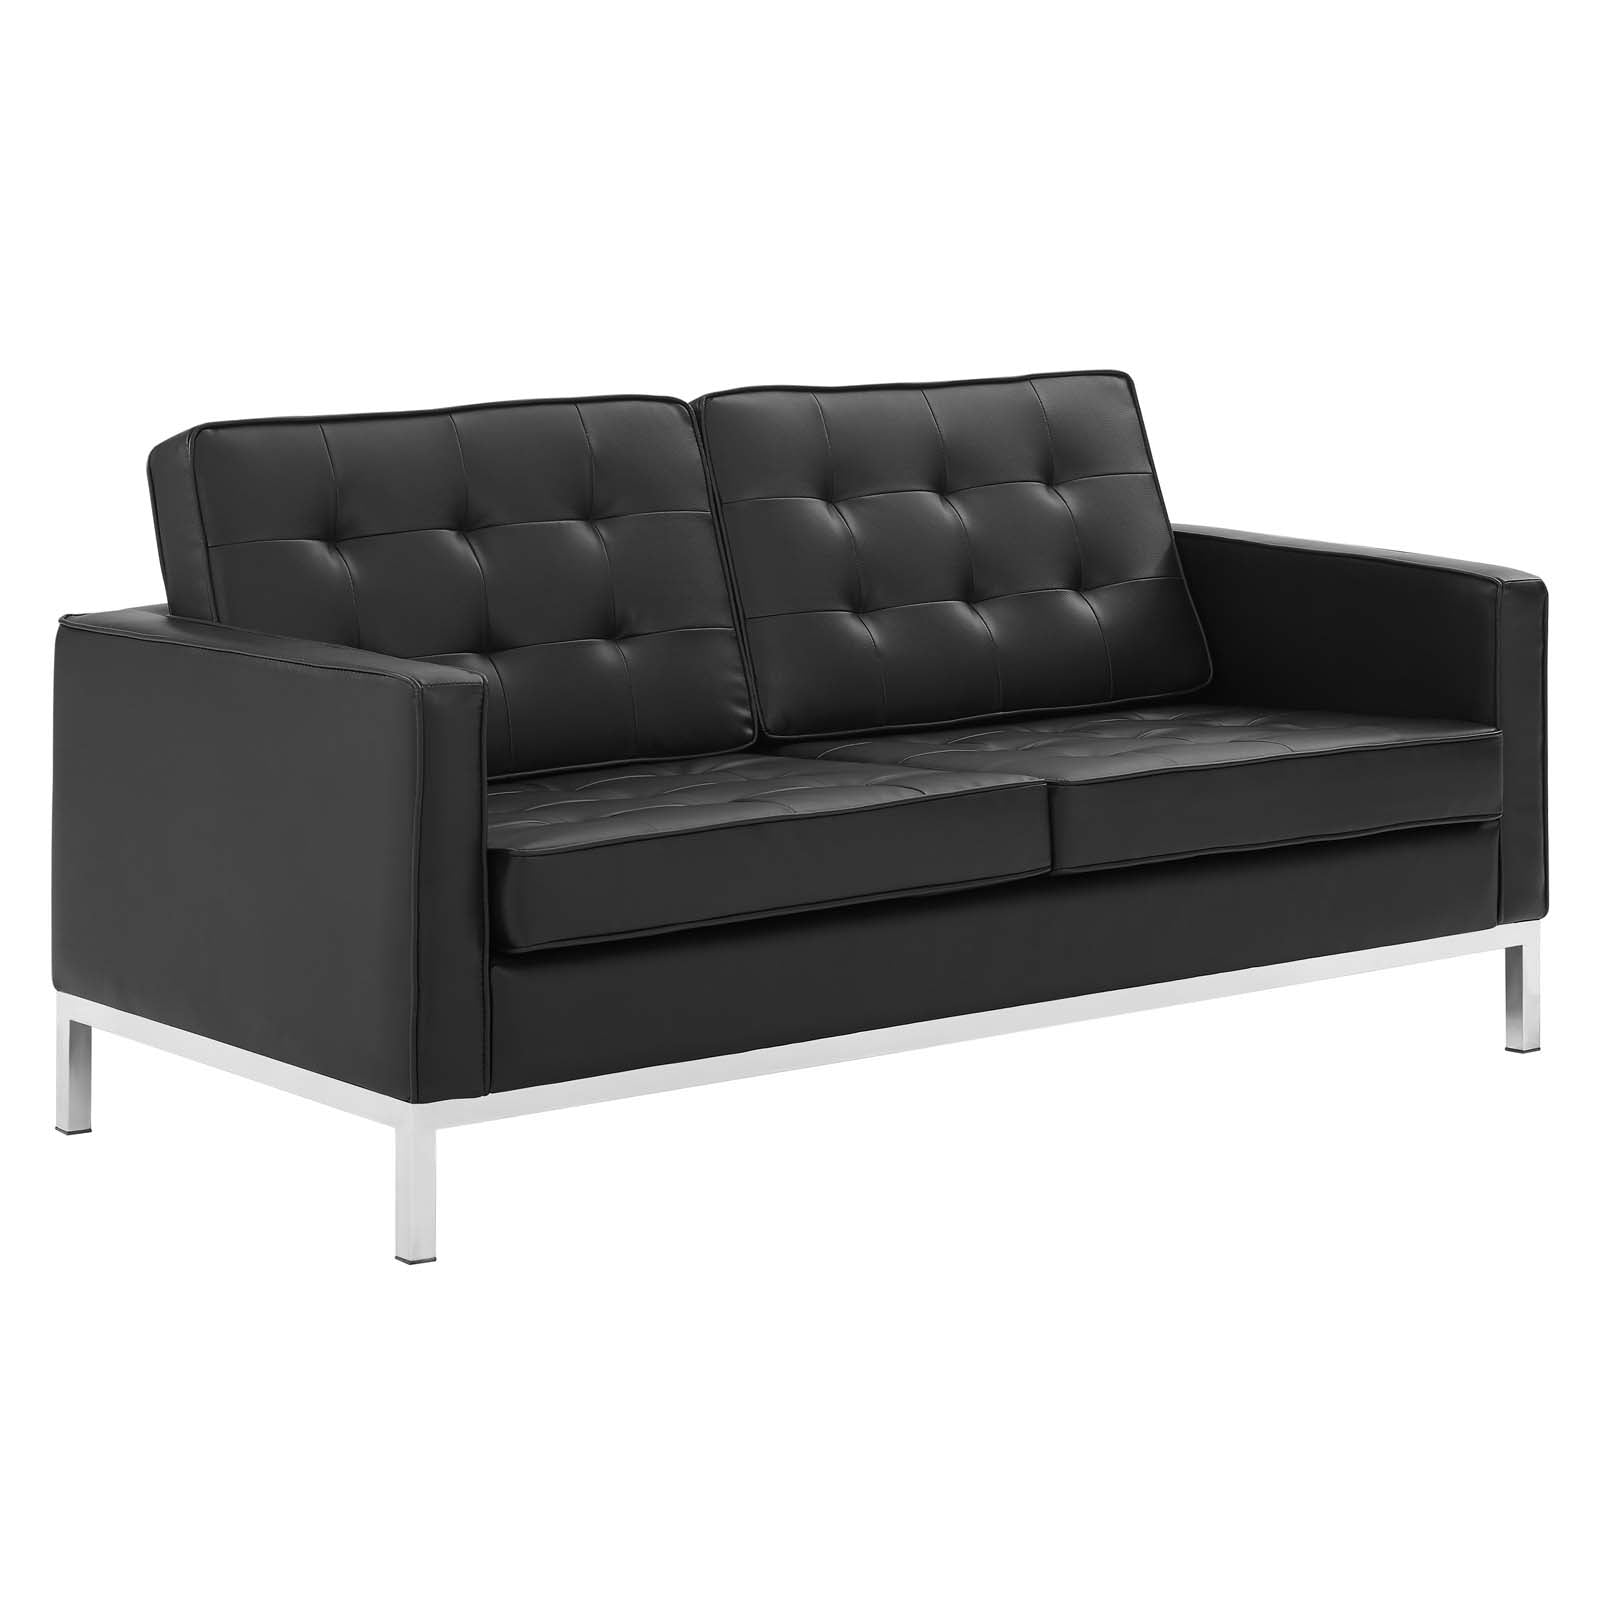 Modway Sofas & Couches - Loft-Tufted-Upholstered-Faux-Leather-Loveseat-and-Armchair-Set-Silver-Black